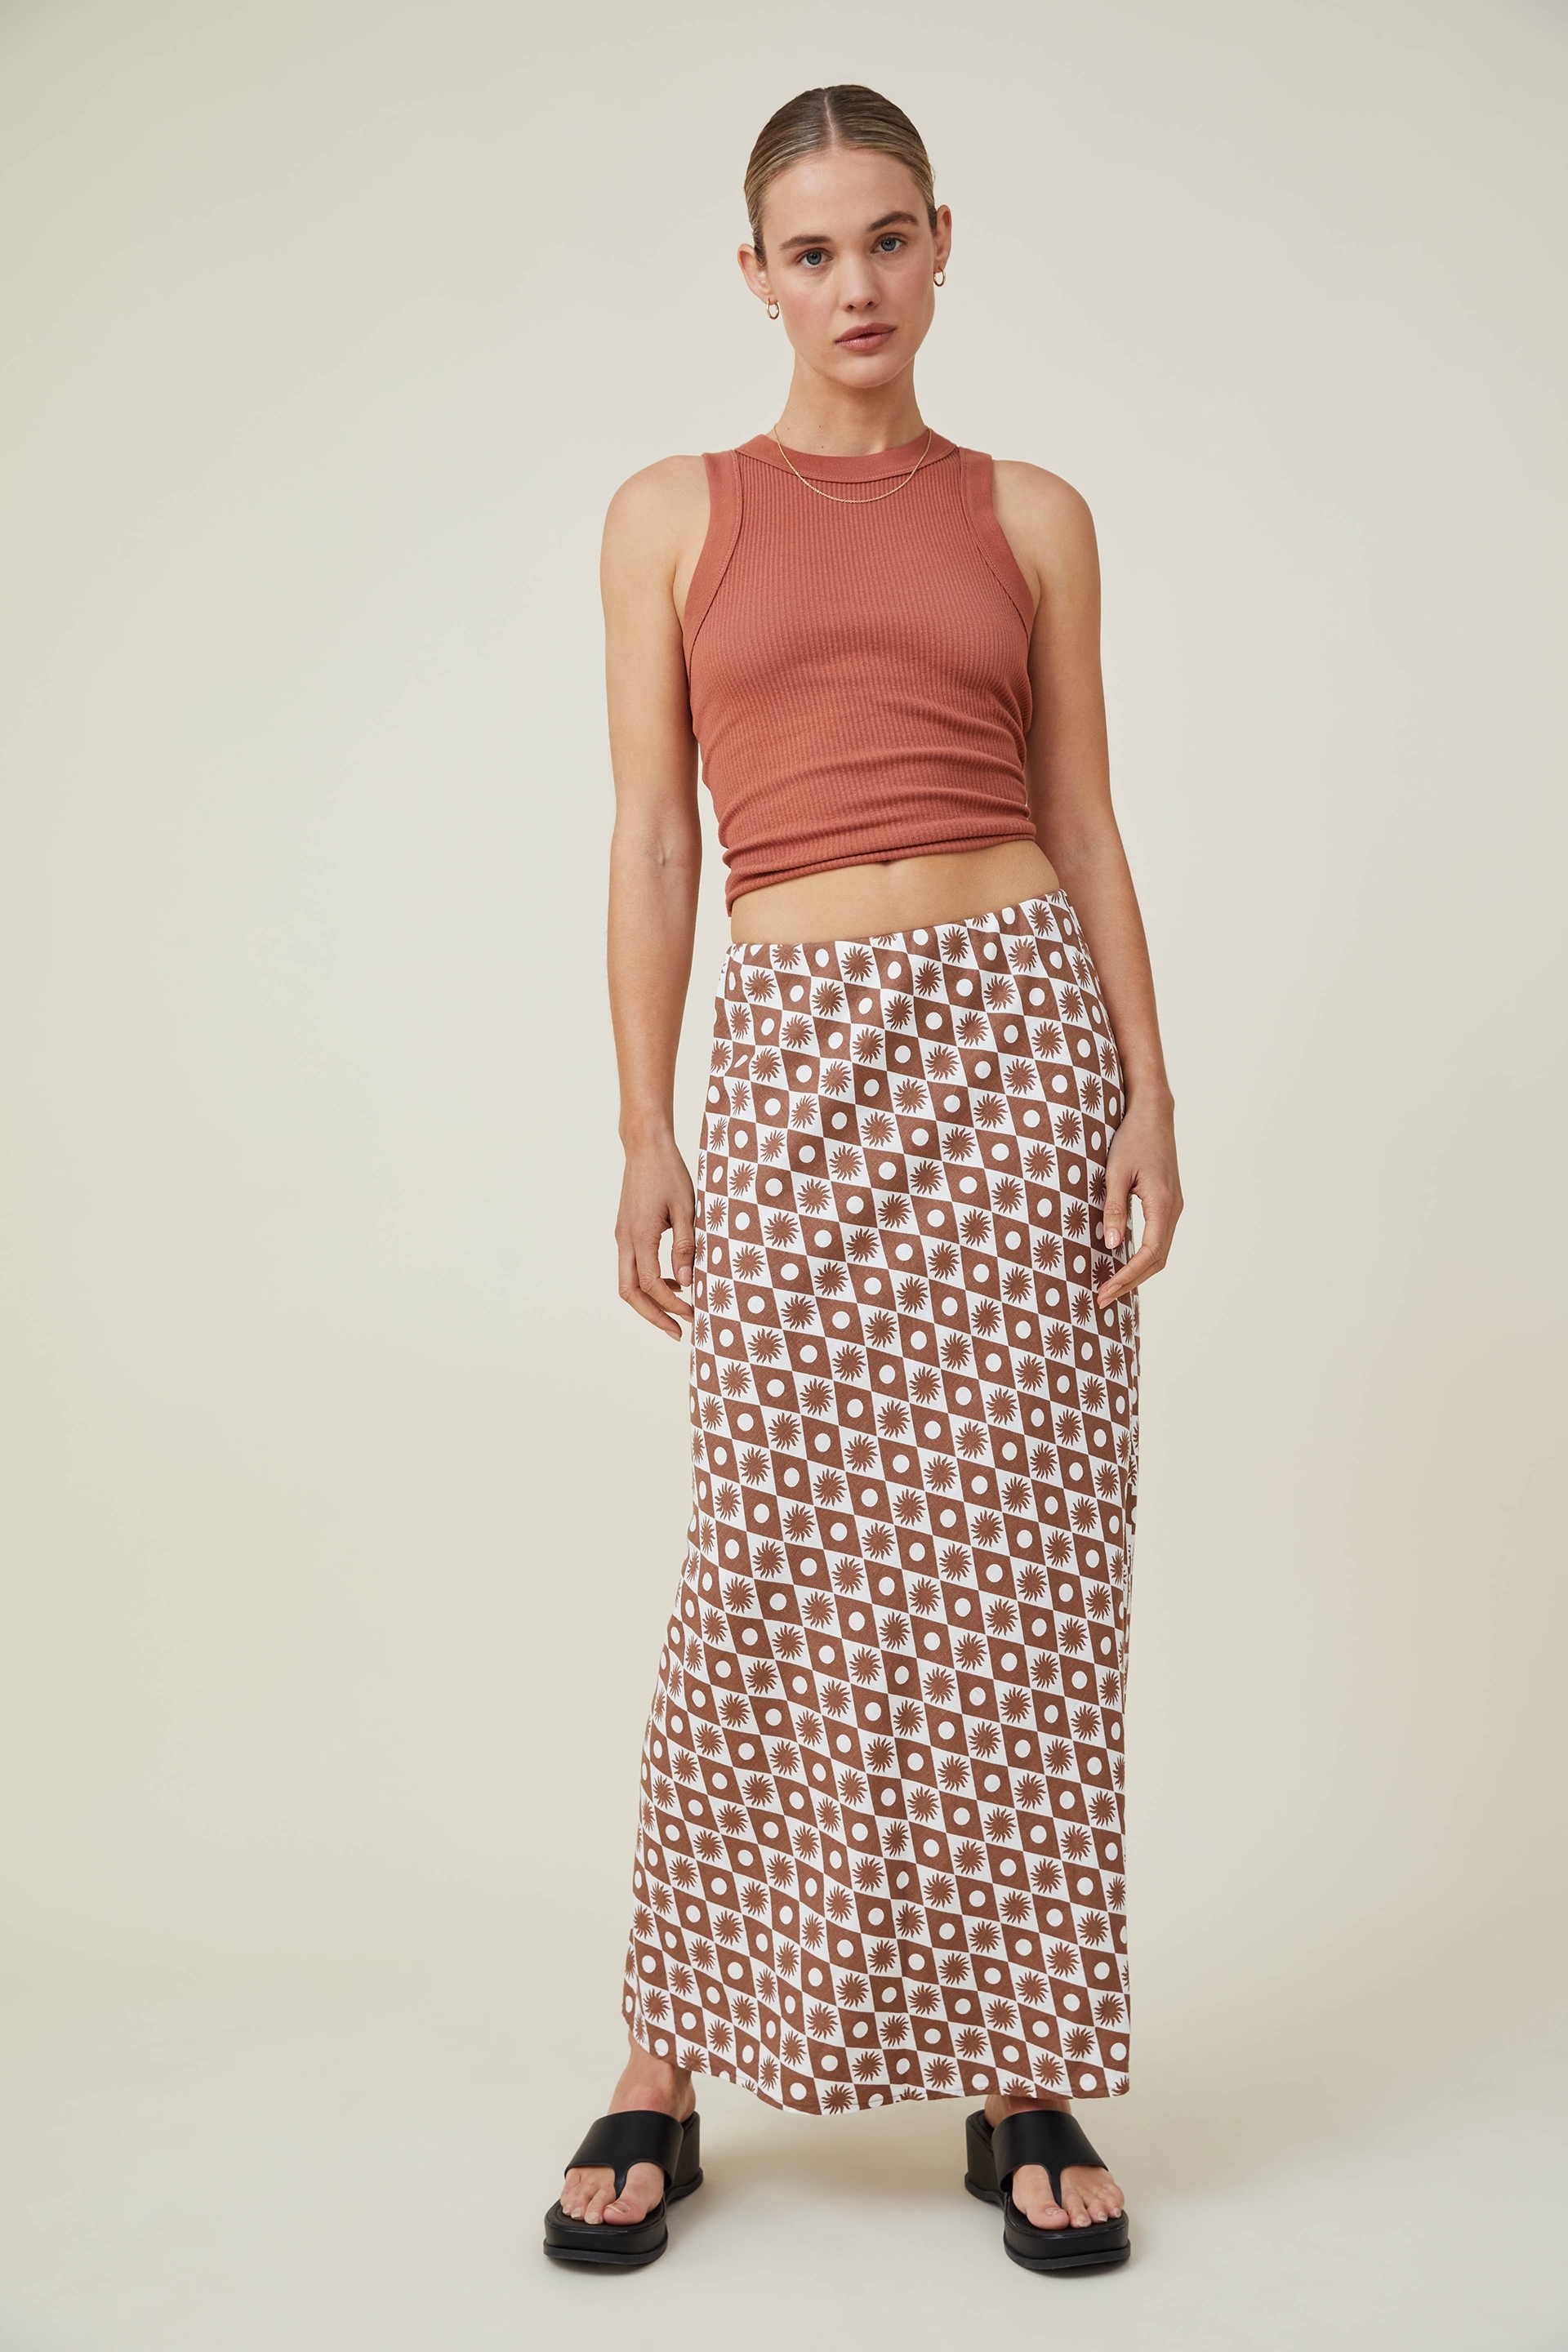 Cotton On Women - Haven Maxi Skirt - Sunny soleil russet brown